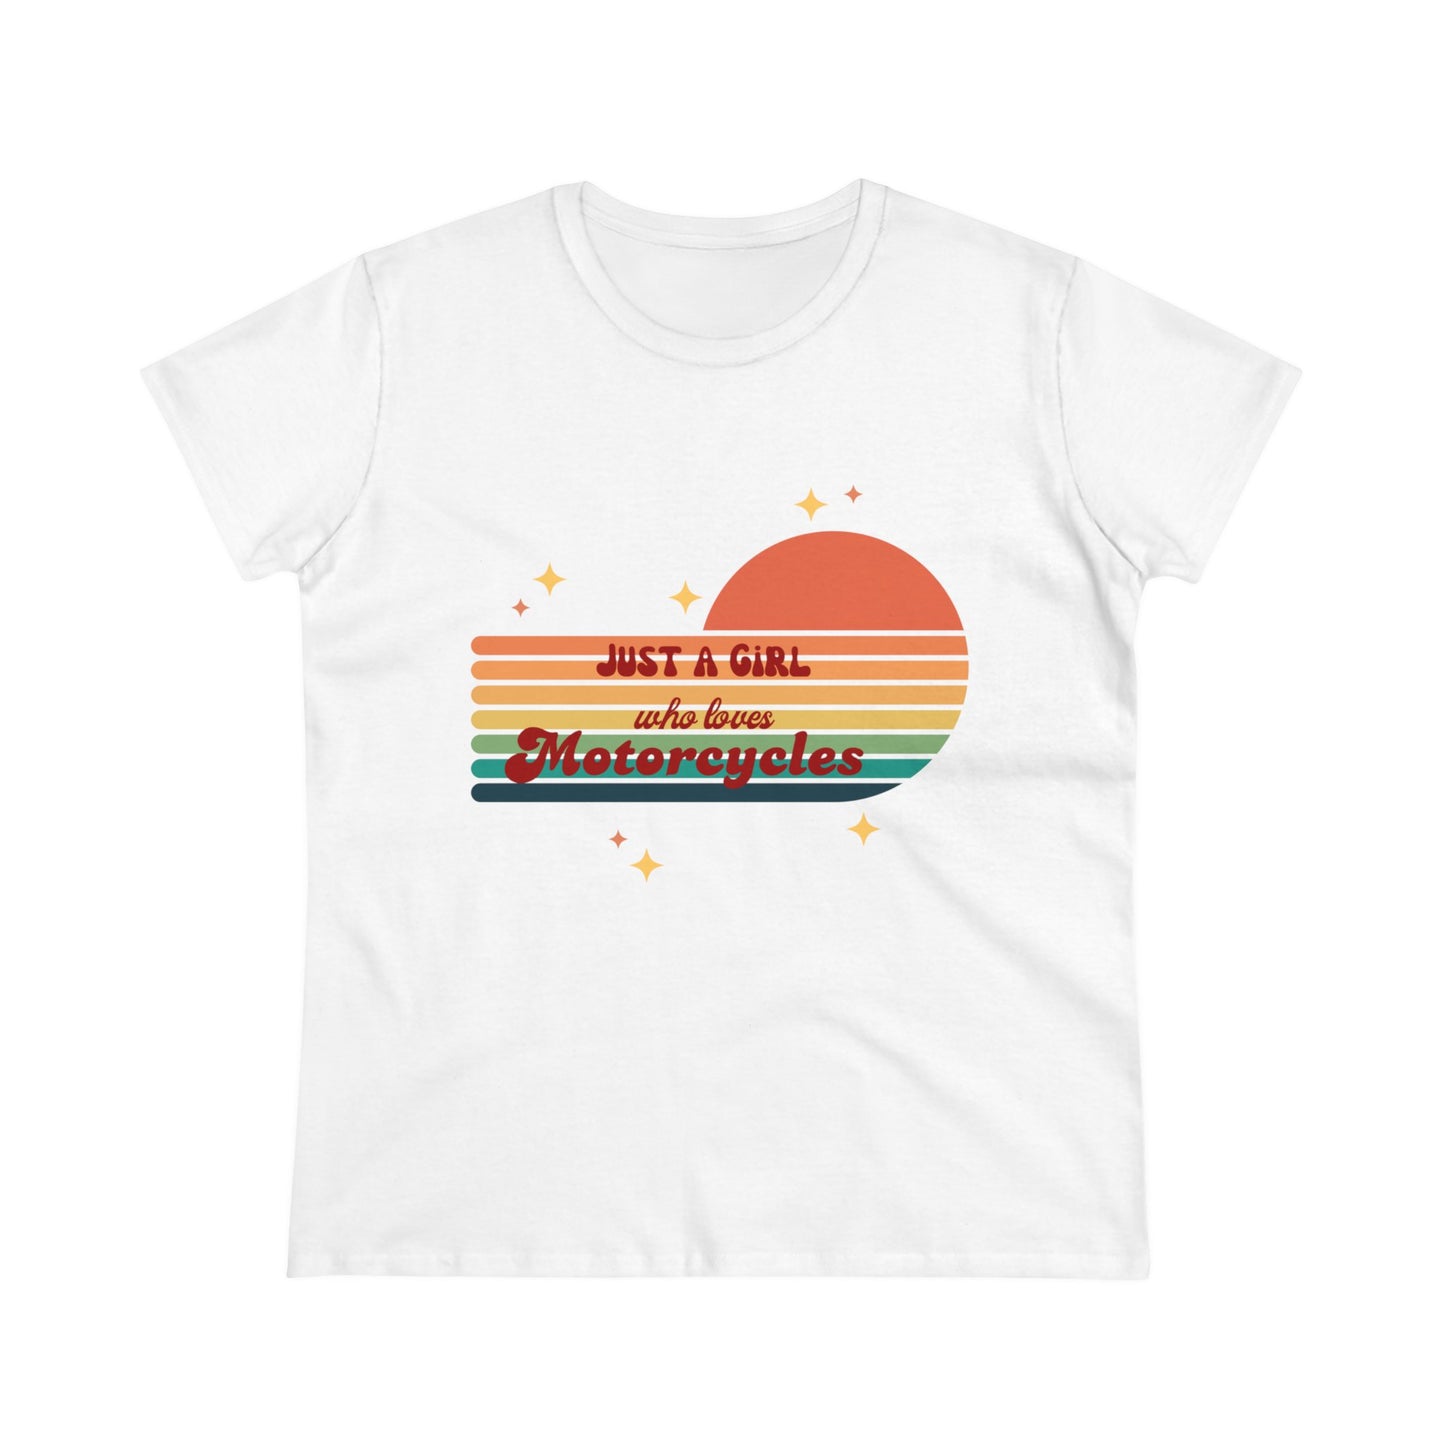 Just a Girl Tee for Women